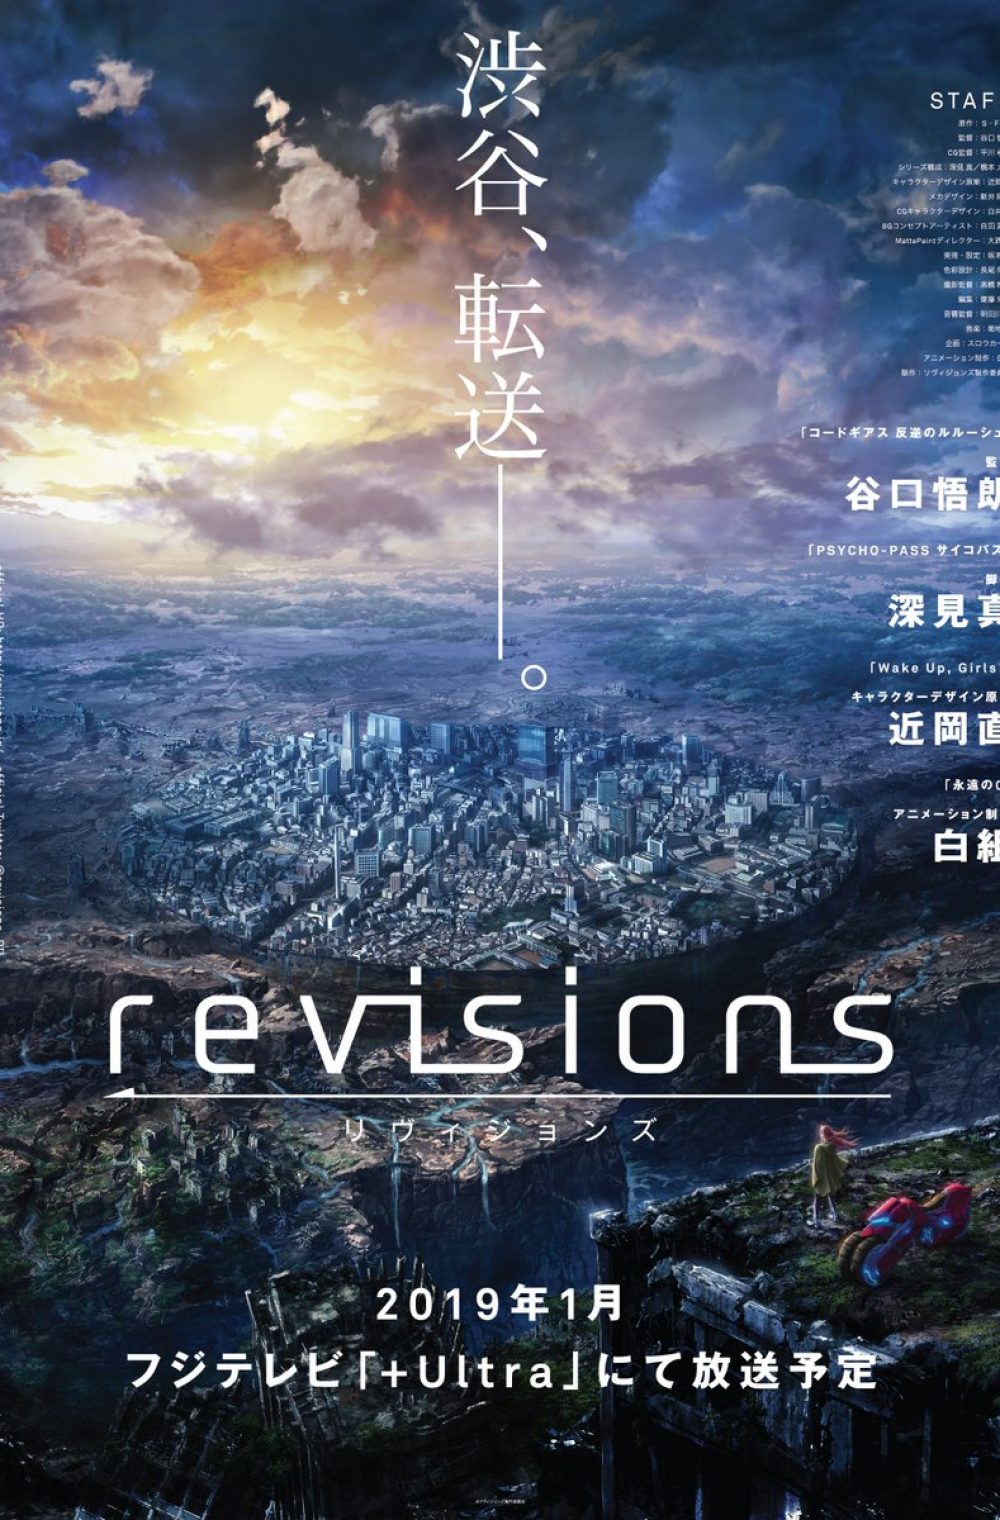 revisions Anime Trailer